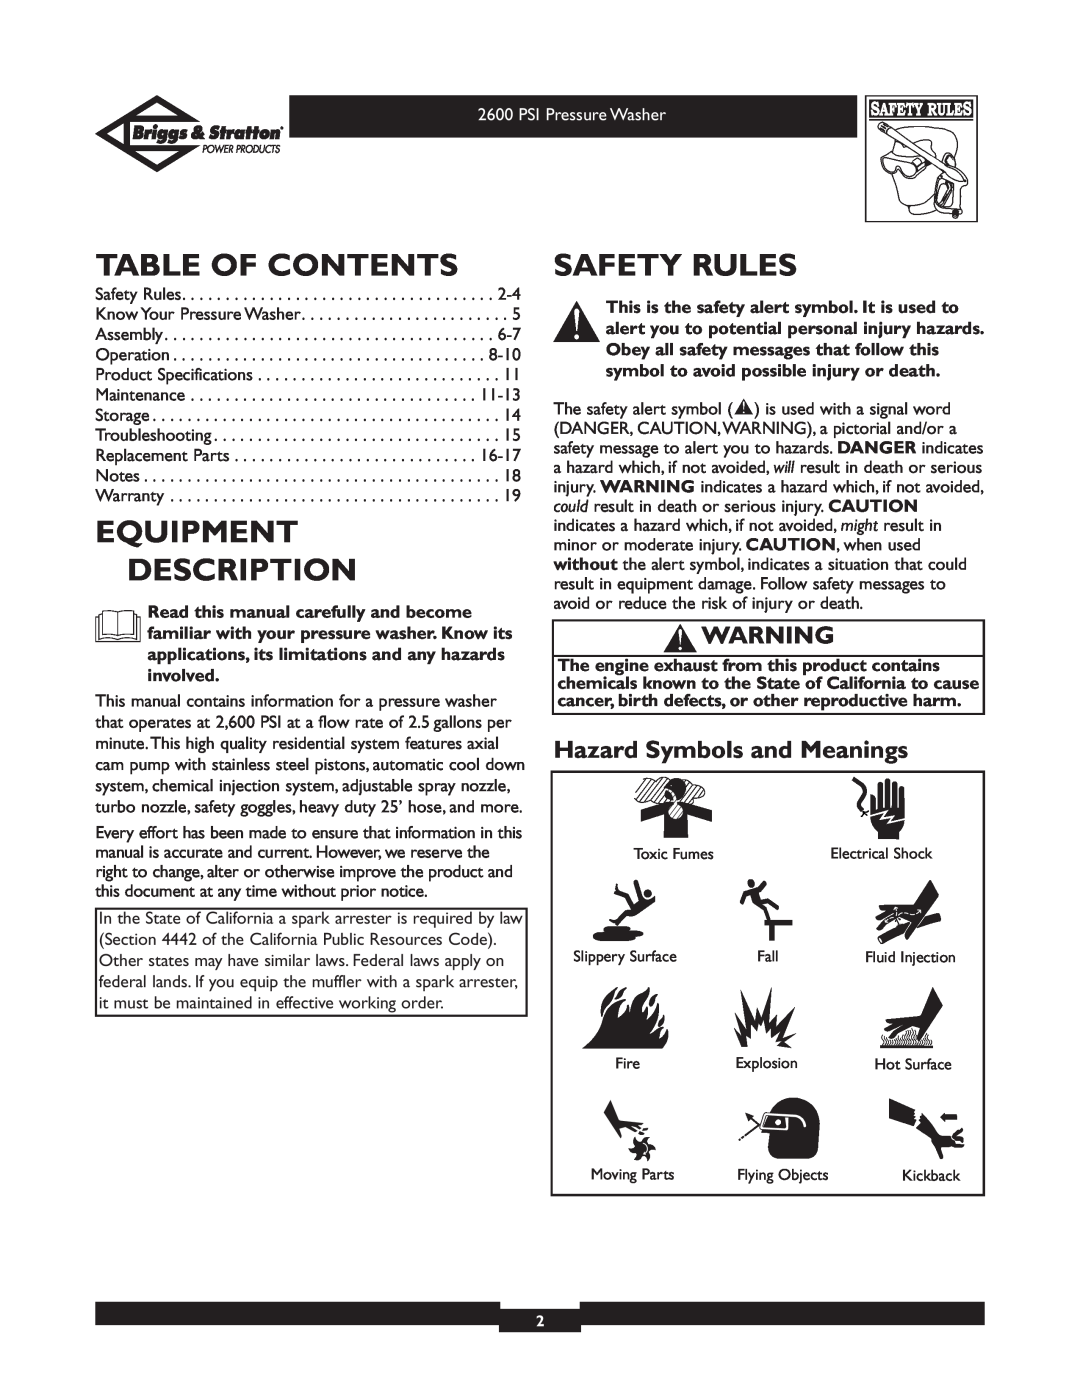 Briggs & Stratton 20216 owner manual Table Of Contents, Equipment Description, Safety Rules, Hazard Symbols and Meanings 